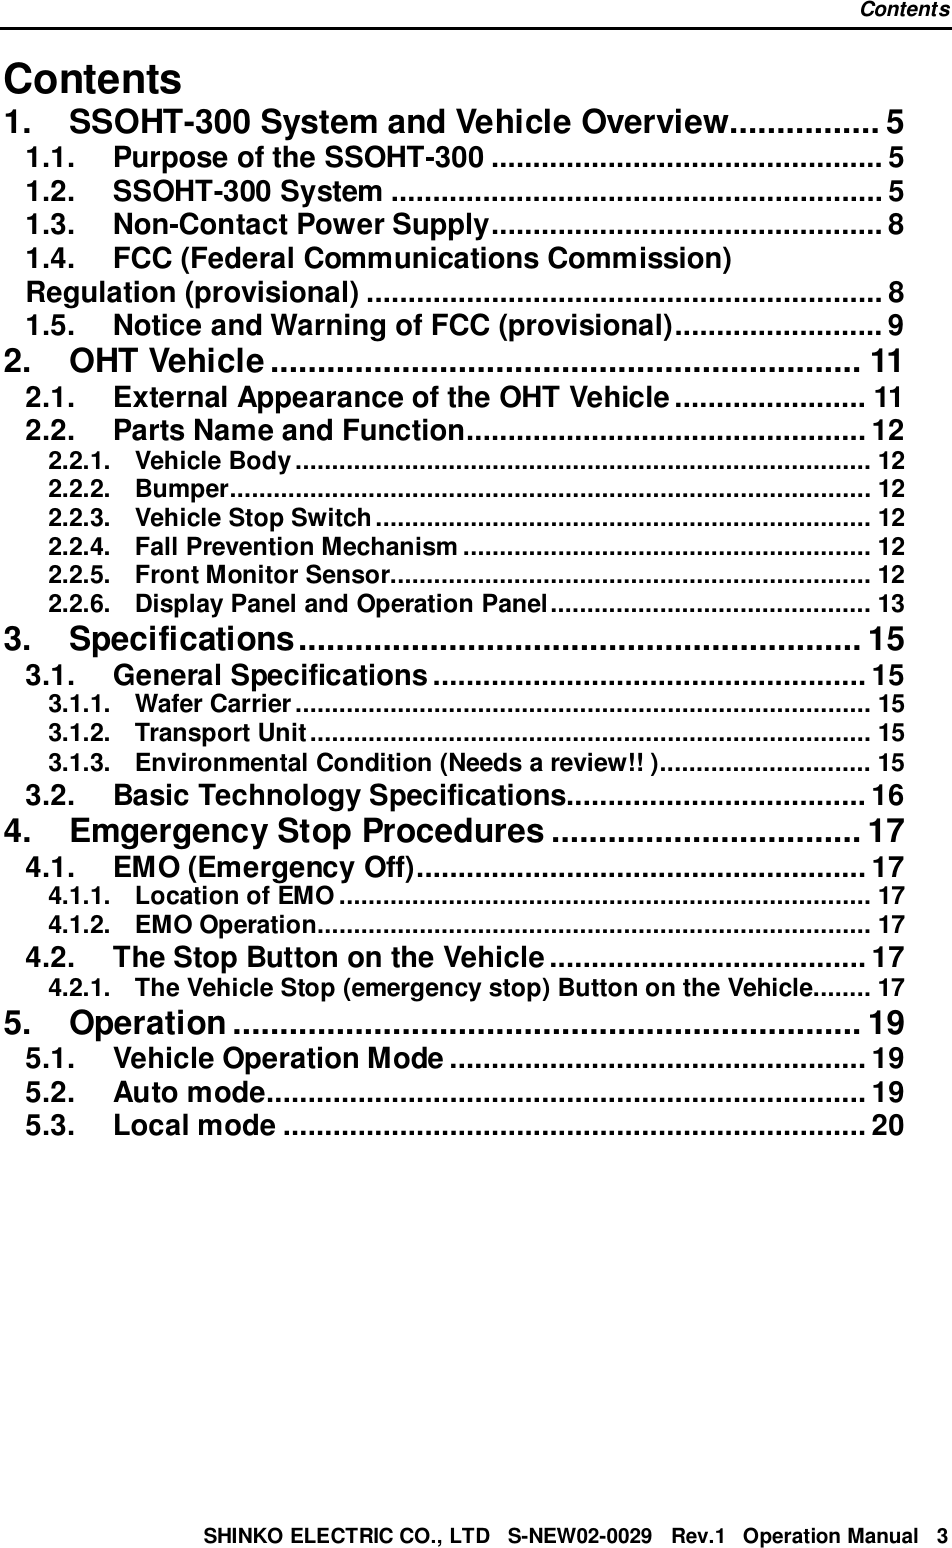 ContentsSHINKO ELECTRIC CO., LTD   S-NEW02-0029   Rev.1   Operation Manual   3Contents1. SSOHT-300 System and Vehicle Overview................ 51.1. Purpose of the SSOHT-300 ............................................... 51.2. SSOHT-300 System ........................................................... 51.3. Non-Contact Power Supply............................................... 81.4. FCC (Federal Communications Commission)Regulation (provisional) .............................................................. 81.5. Notice and Warning of FCC (provisional)......................... 92. OHT Vehicle ............................................................... 112.1. External Appearance of the OHT Vehicle....................... 112.2. Parts Name and Function................................................ 122.2.1. Vehicle Body............................................................................... 122.2.2. Bumper........................................................................................ 122.2.3. Vehicle Stop Switch.................................................................... 122.2.4. Fall Prevention Mechanism ........................................................ 122.2.5. Front Monitor Sensor.................................................................. 122.2.6. Display Panel and Operation Panel............................................ 133. Specifications............................................................ 153.1. General Specifications.................................................... 153.1.1. Wafer Carrier............................................................................... 153.1.2. Transport Unit............................................................................. 153.1.3. Environmental Condition (Needs a review!! )............................. 153.2. Basic Technology Specifications.................................... 164. Emgergency Stop Procedures ................................. 174.1. EMO (Emergency Off)...................................................... 174.1.1. Location of EMO ......................................................................... 174.1.2. EMO Operation............................................................................ 174.2. The Stop Button on the Vehicle...................................... 174.2.1. The Vehicle Stop (emergency stop) Button on the Vehicle........ 175. Operation ................................................................... 195.1. Vehicle Operation Mode .................................................. 195.2. Auto mode........................................................................ 195.3. Local mode ...................................................................... 20